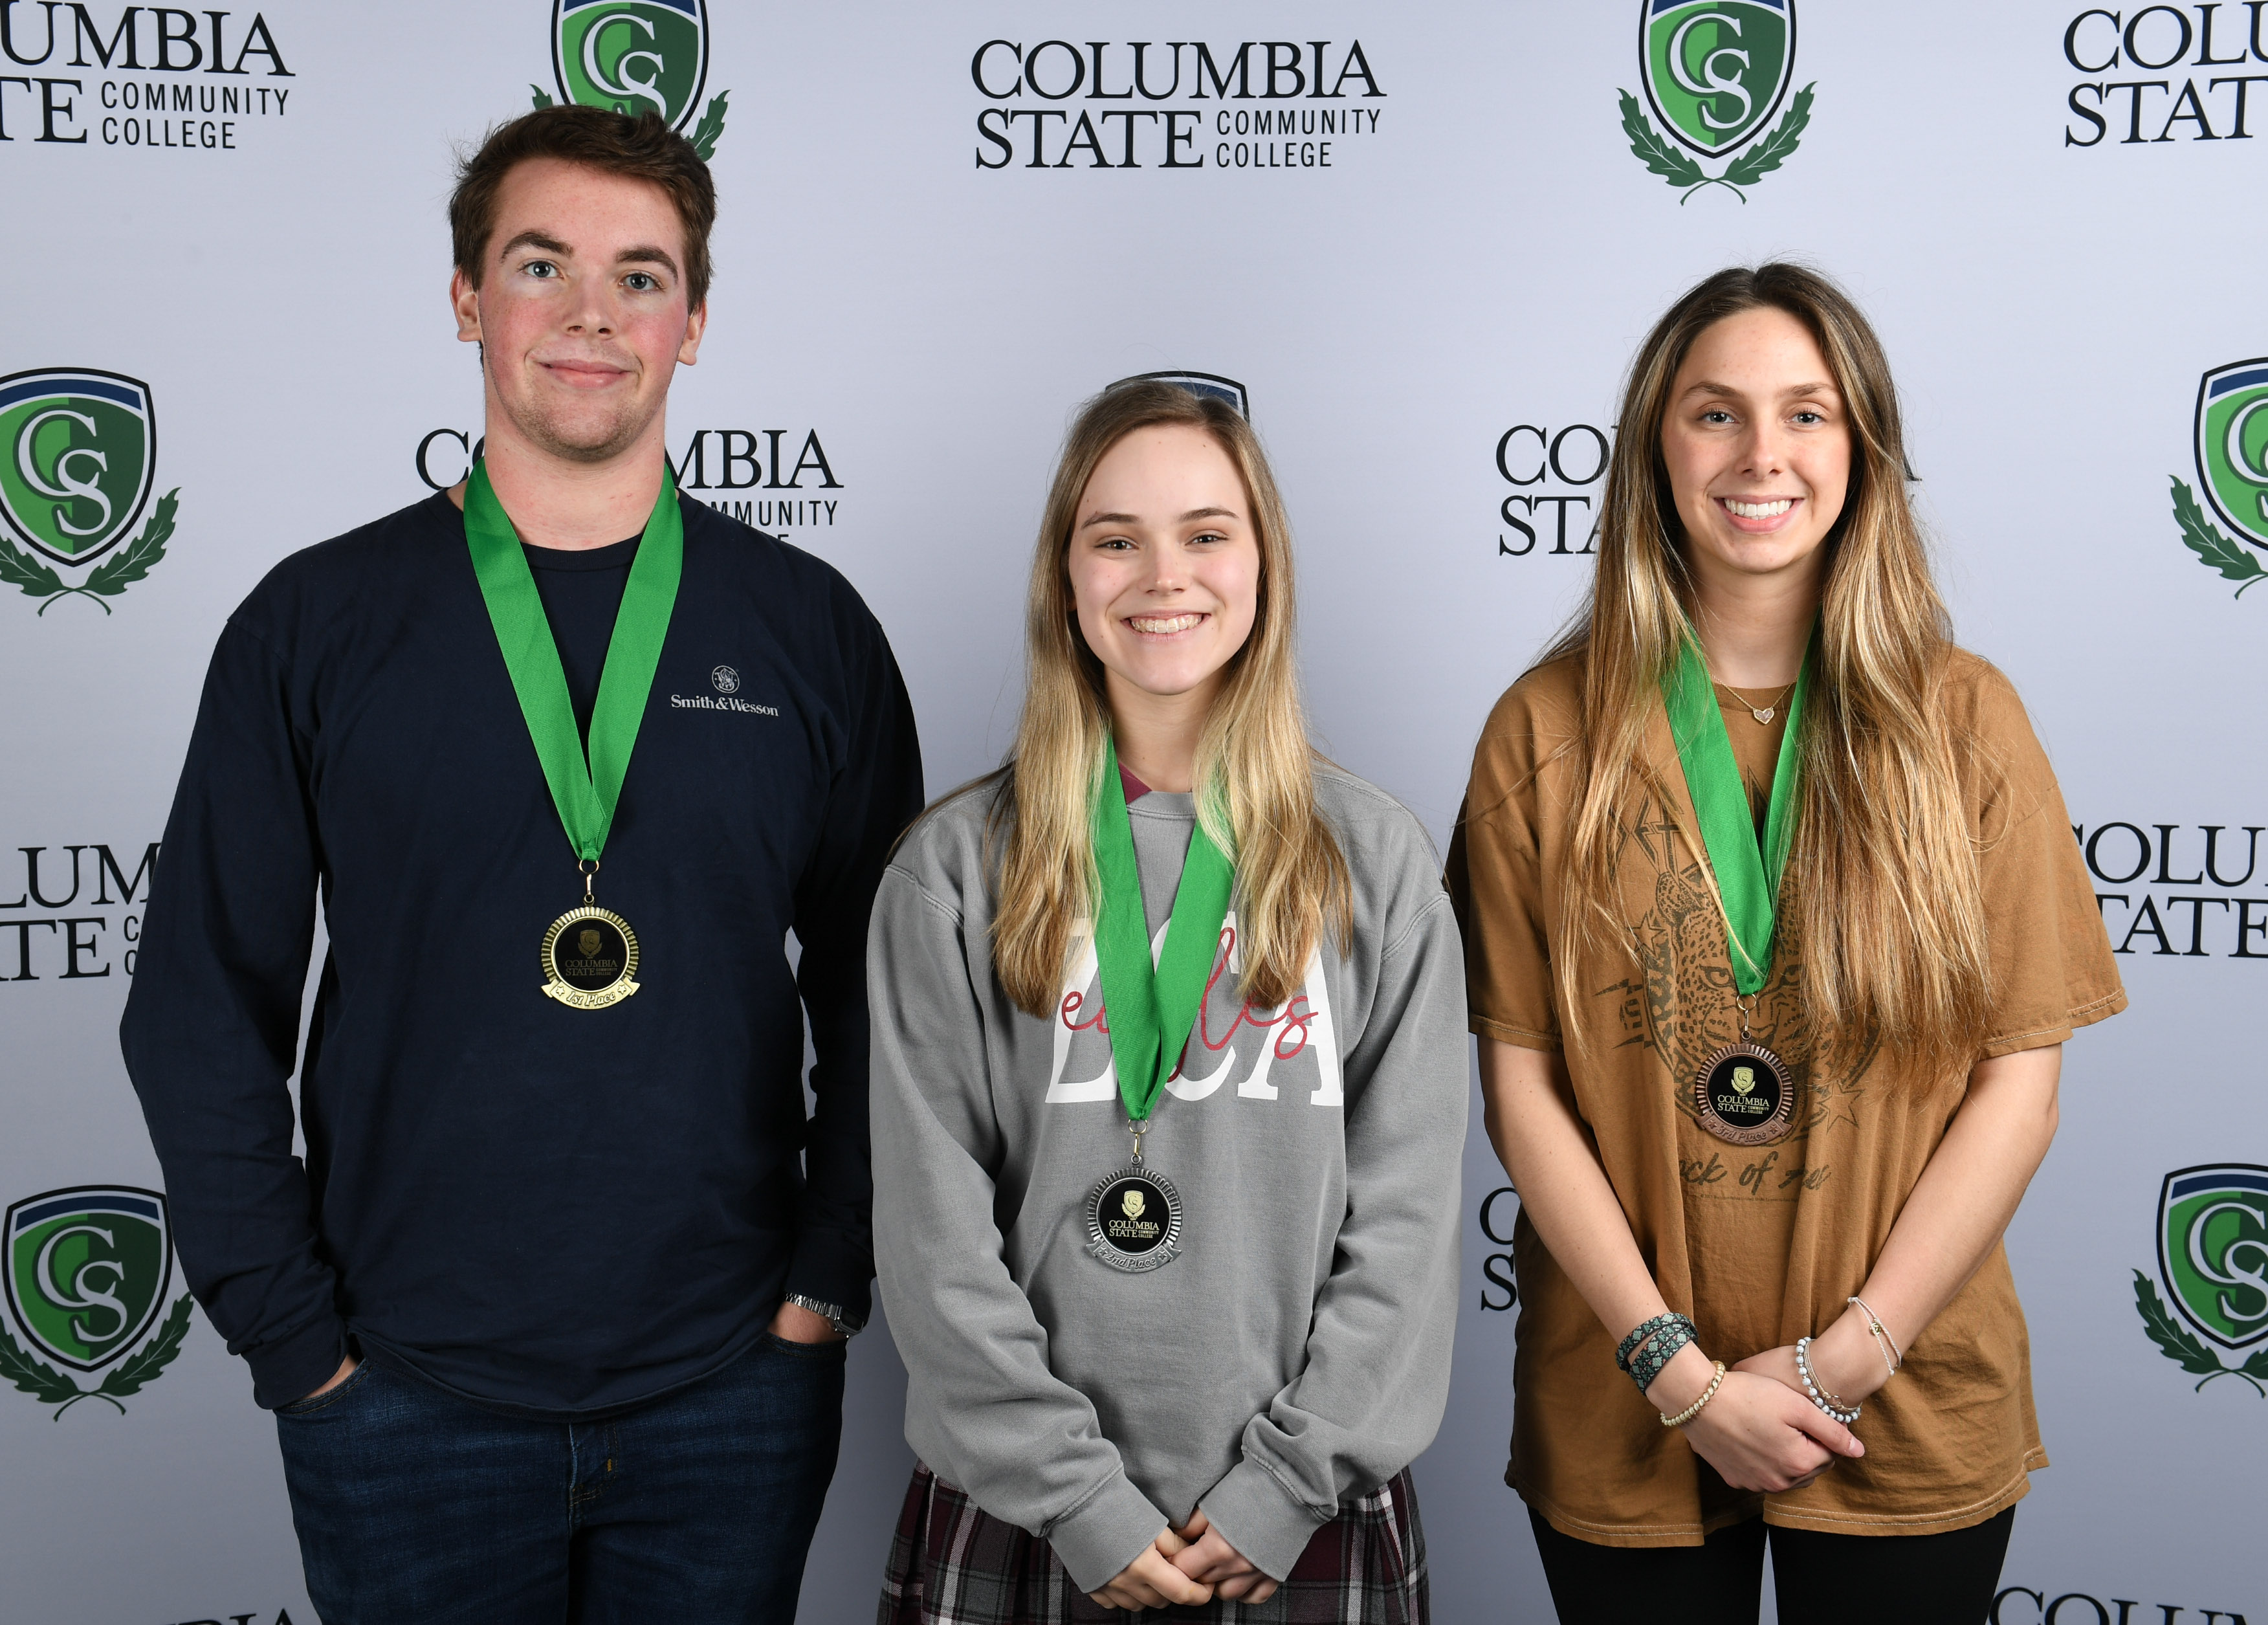 Essay Winners (left to right): First place winner, Brice Coates of Hickman County High School; second place winner, Morgan Allen of Zion Christian Academy; and third place winner, Hannah Davidson of Hickman County High School.